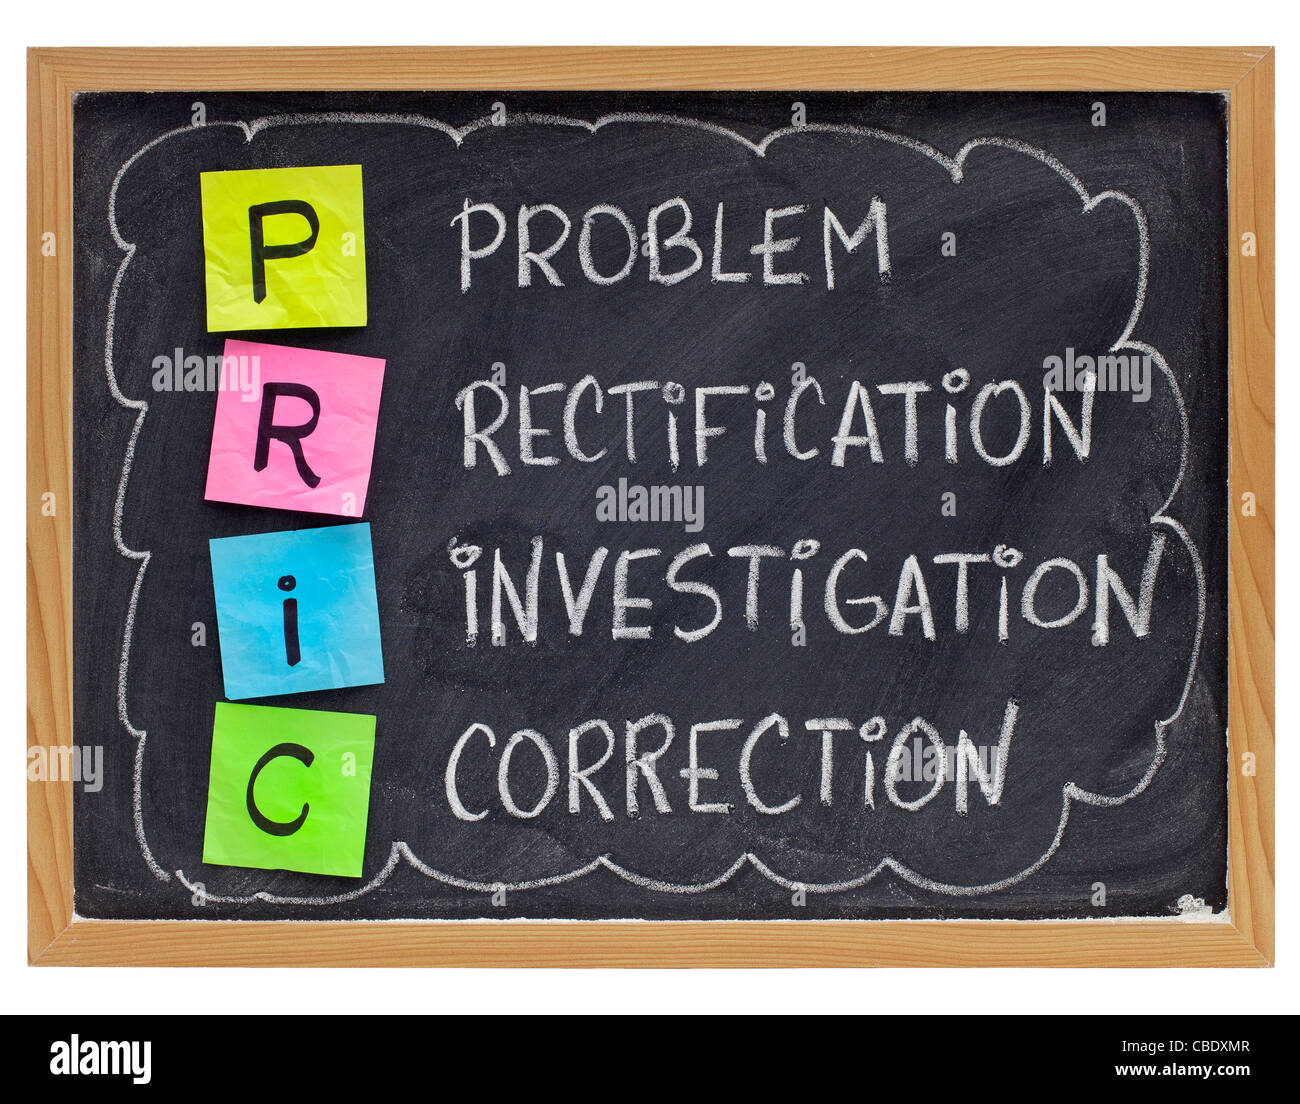 PRIC (Problem, Rectification, Investigation, Correction) - good quality management practice Stock Photo